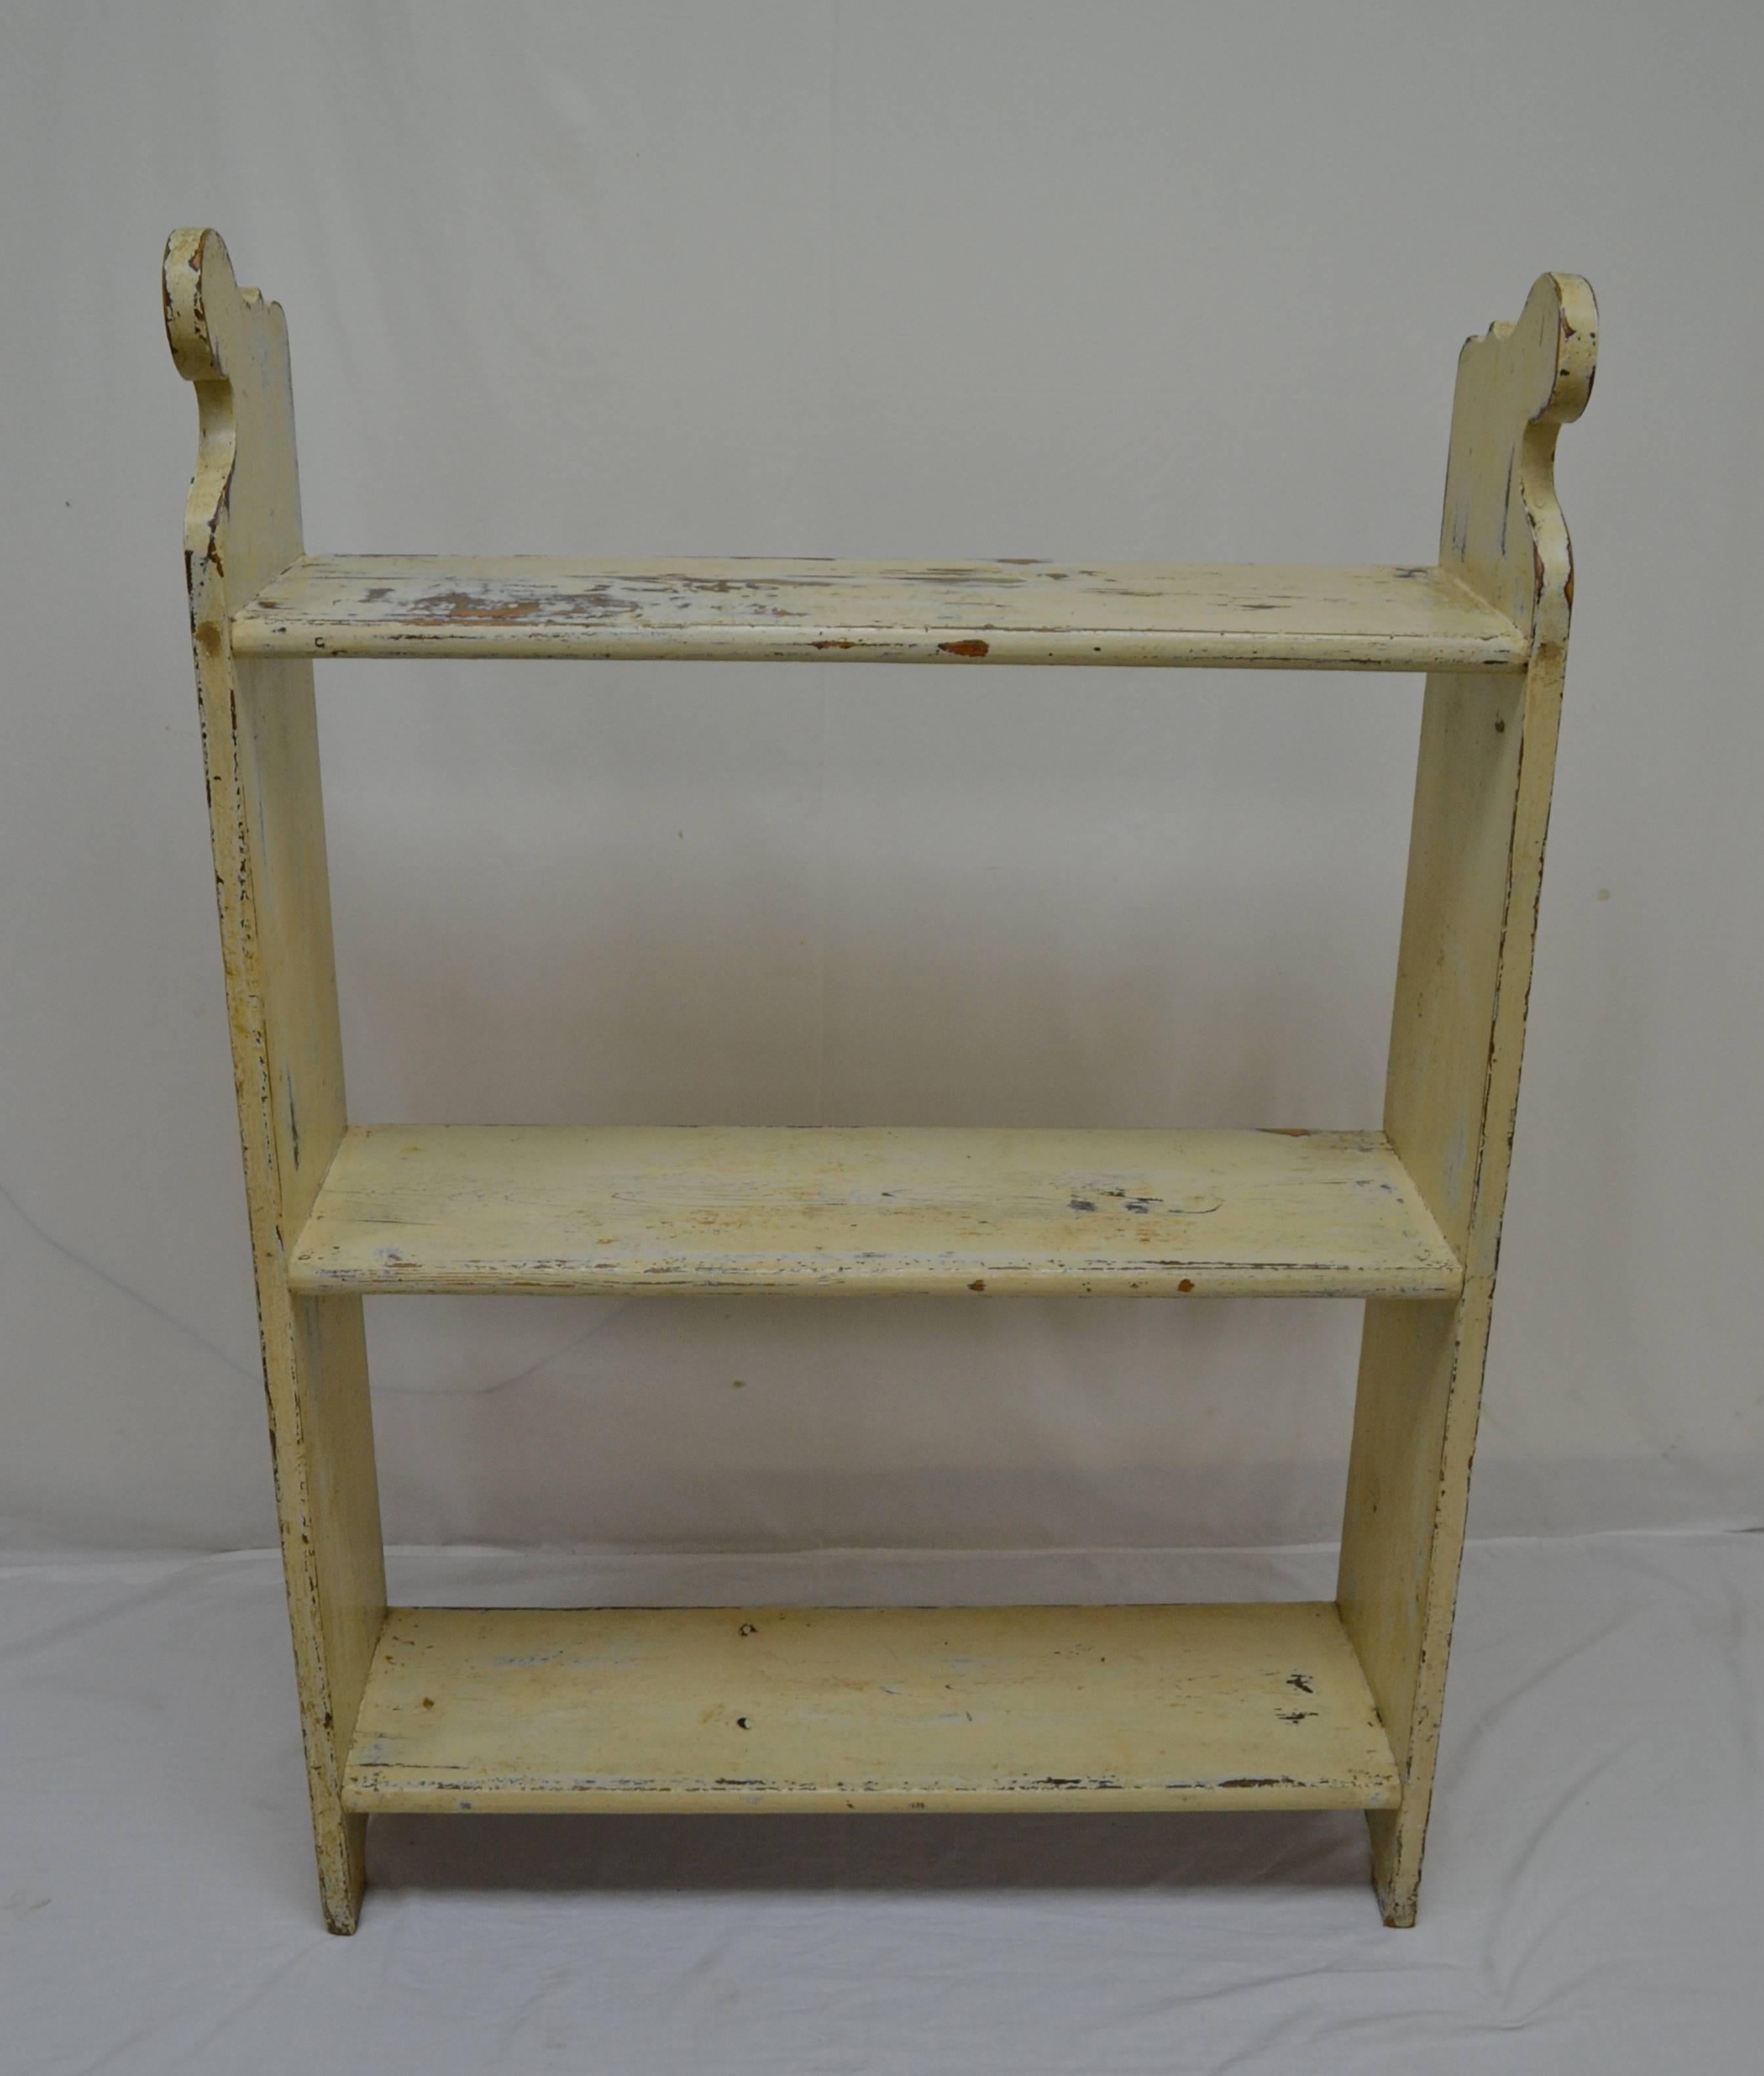 A sturdy pine three shelf unit with a sphinx-like curve to the top of the thick sides. The top and bottom shelves are through-tenoned into the sides and the middle shelf is dovetail mortised, for strength and stability. With shelves a true inch